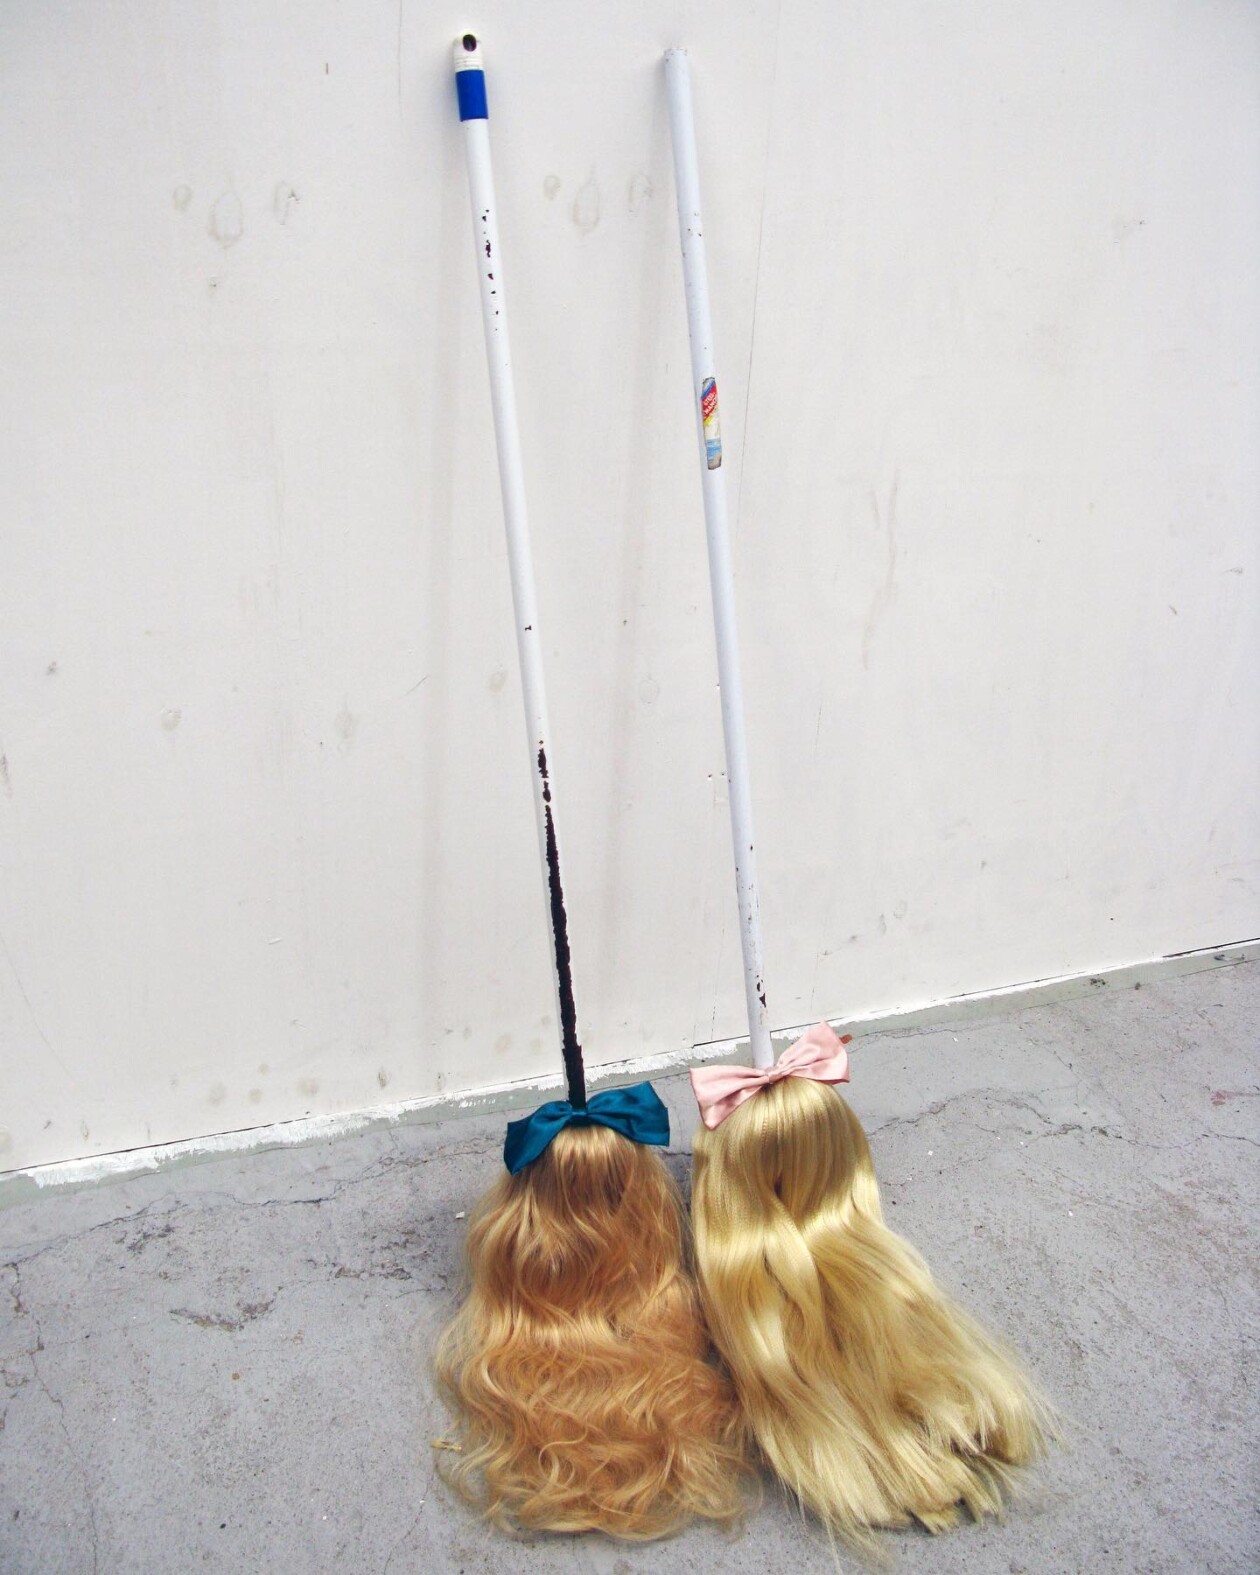 After The Waves (the Waifs) Surreal Sculptures Of Brooms With Human Hairs By Vincent Olinet (8)